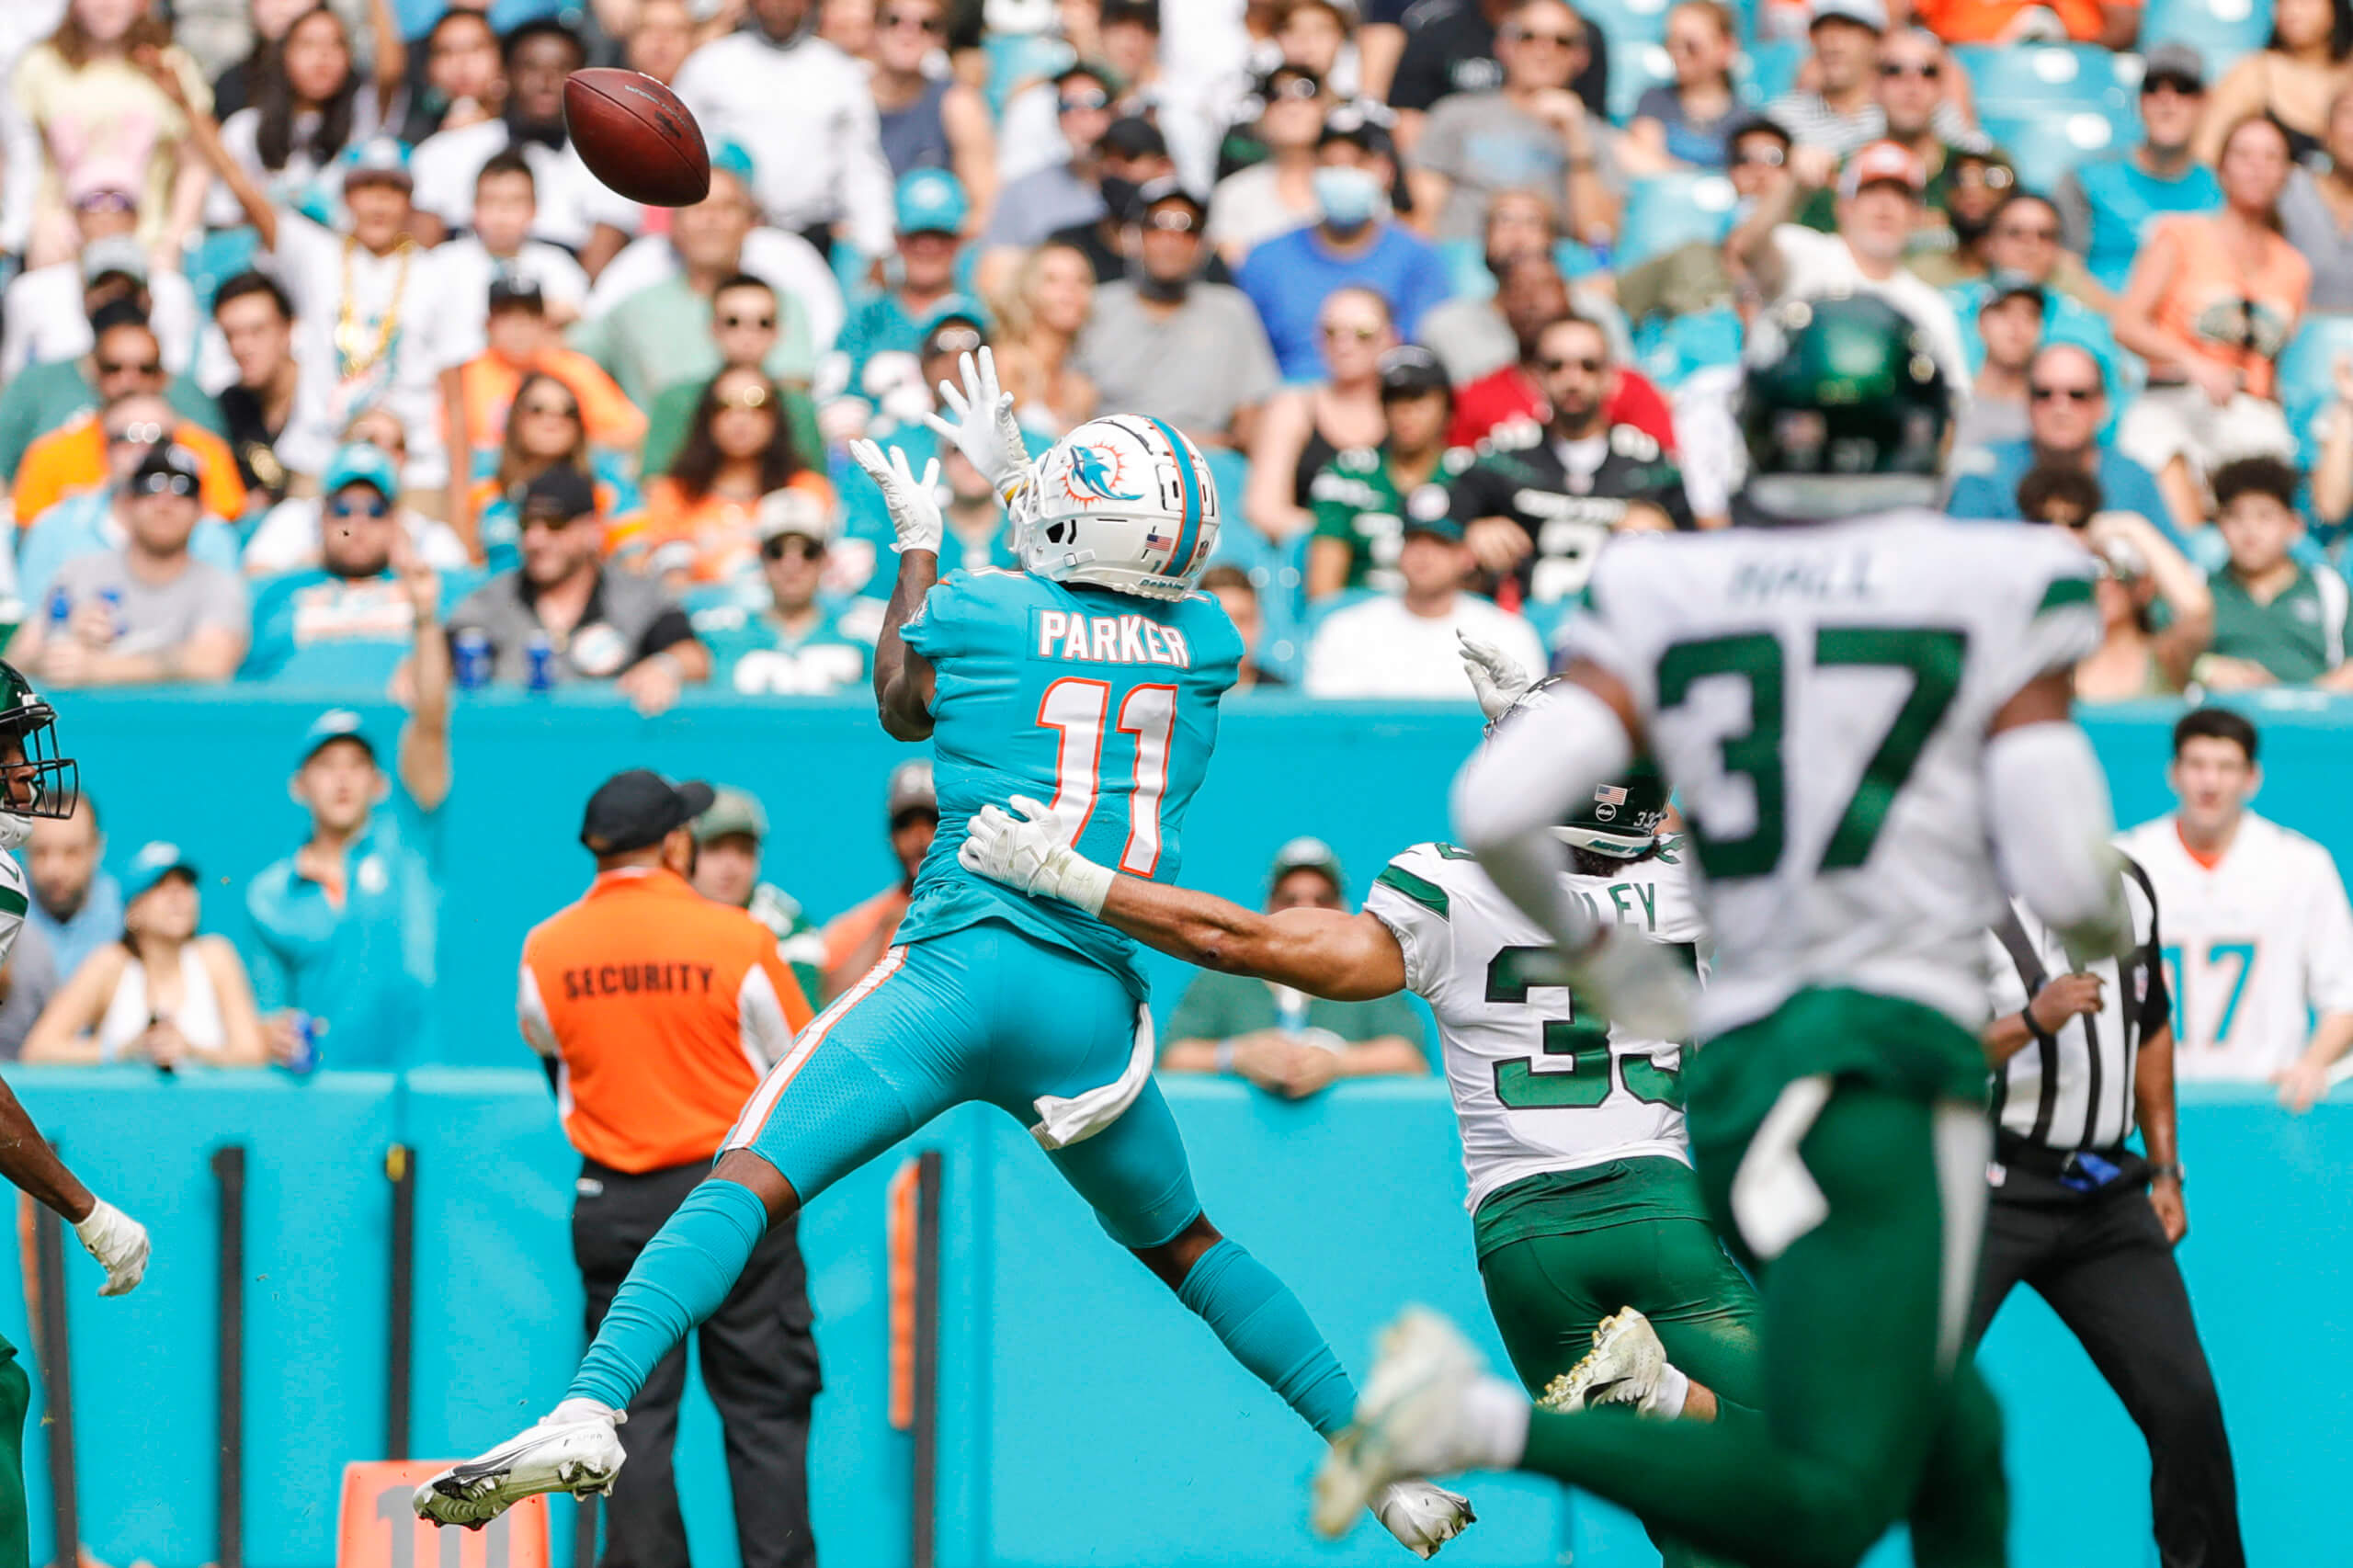 Jets stumble down the stretch, fall to Dolphins